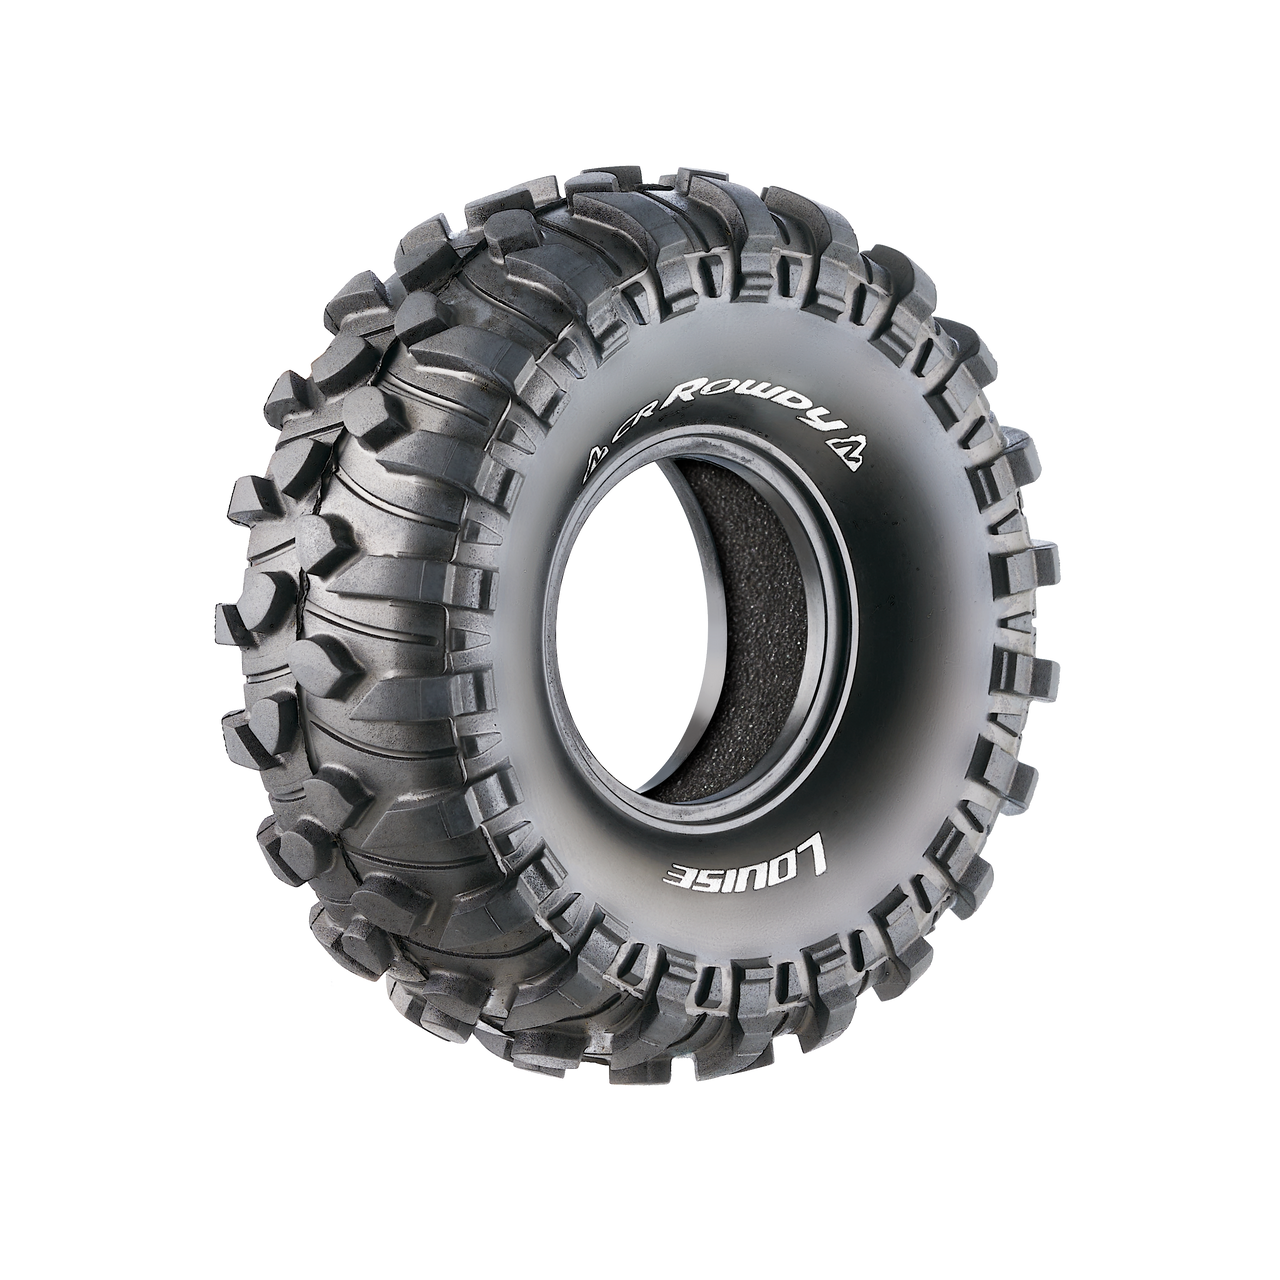 L-T3233VI Louise CR-Rowdy 1.9 Crawler Tires with Insert (2)